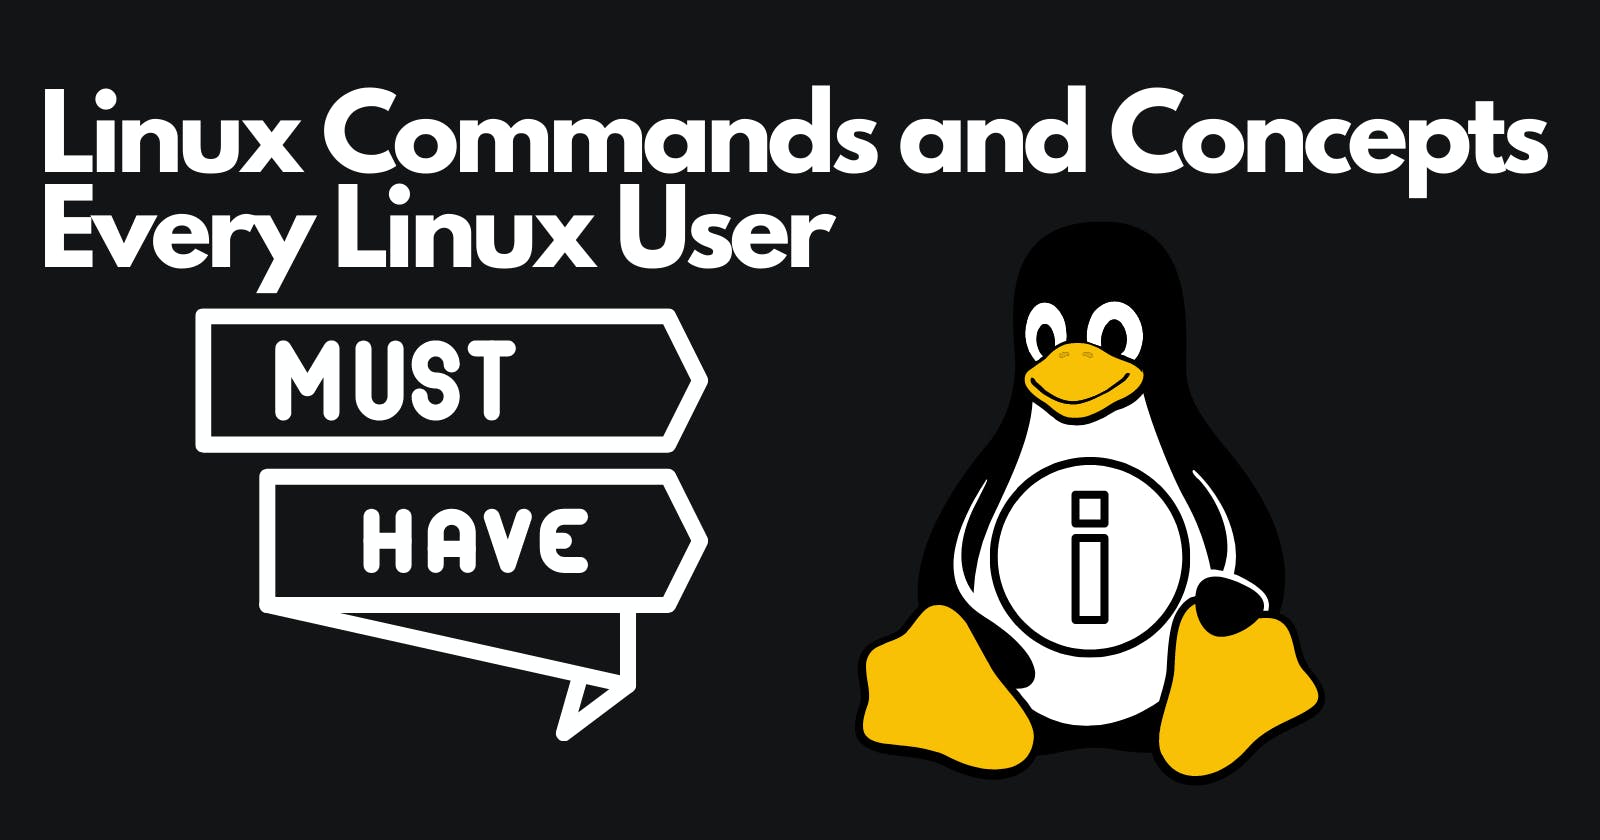 Important Linux Commands and Concepts Every Linux User Must Know